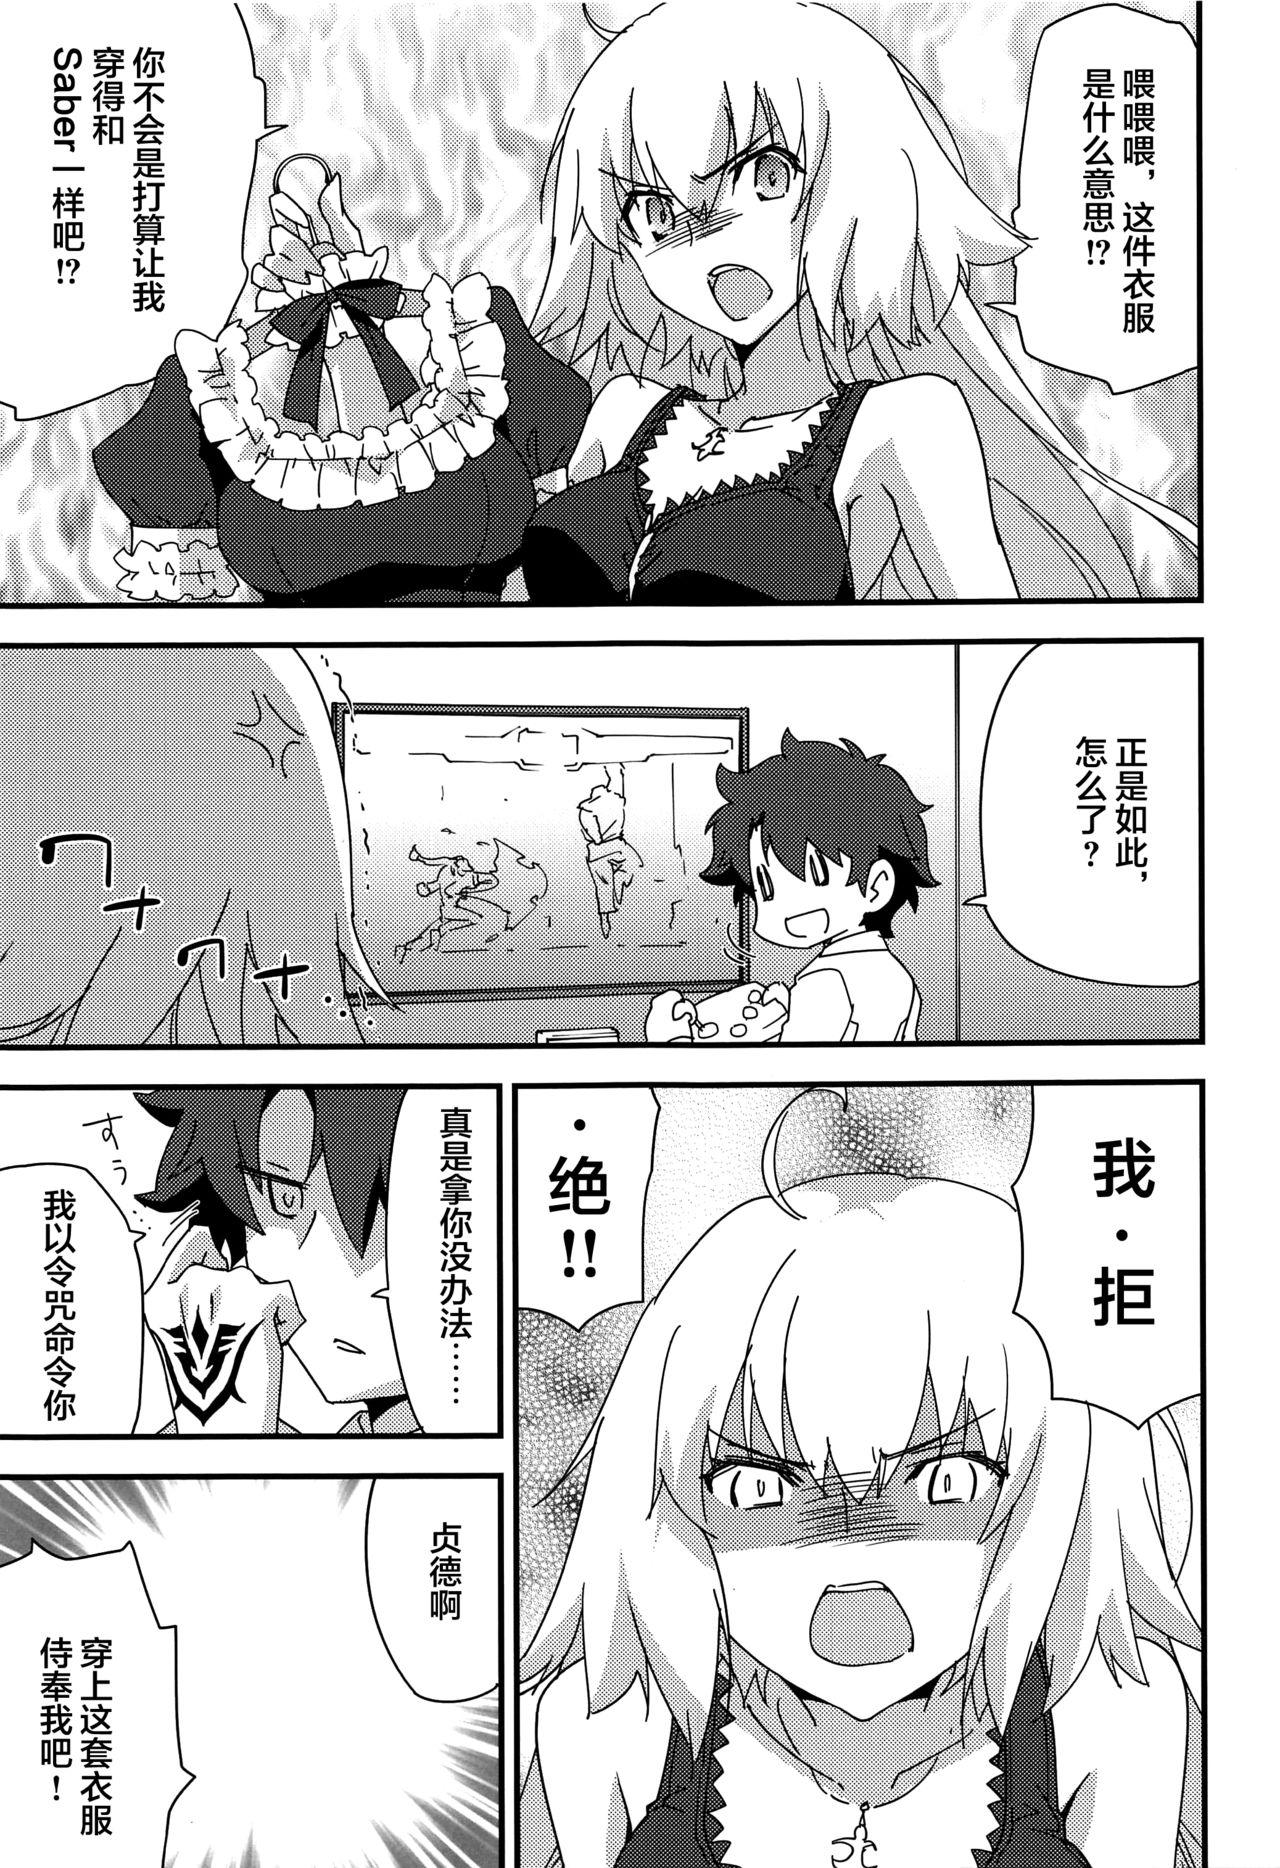 Porn Star Gohoushi Maid Jeanne-chan - Fate grand order Euro - Page 4